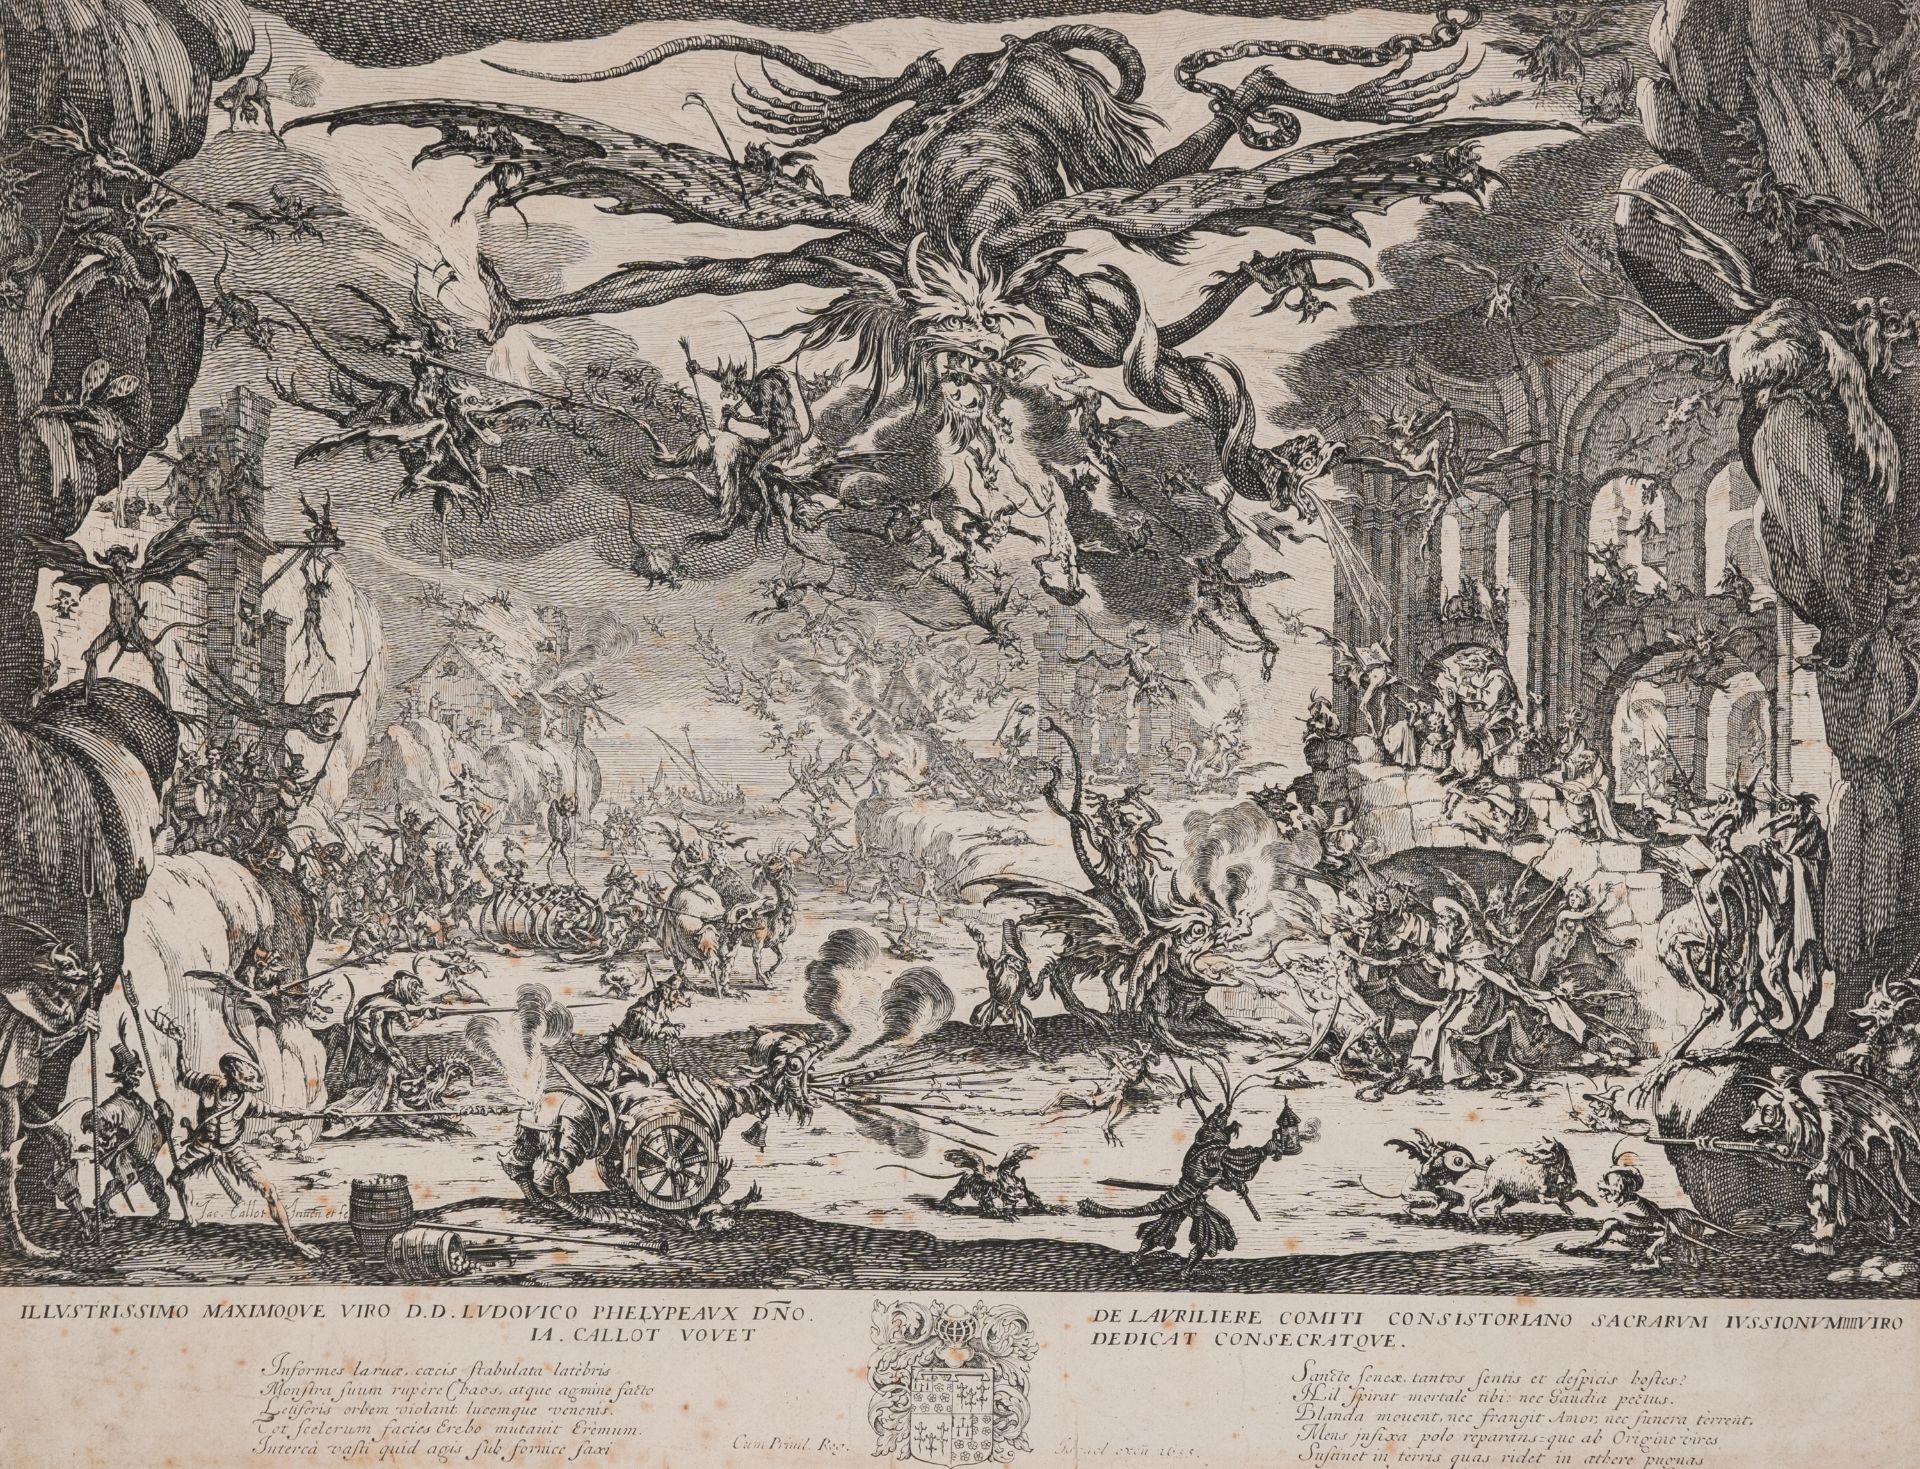 Jacques Callot (1592Ð1635): 'The temptation of Saint Anthony', engraving on paper, ca. 1635 - Image 2 of 3